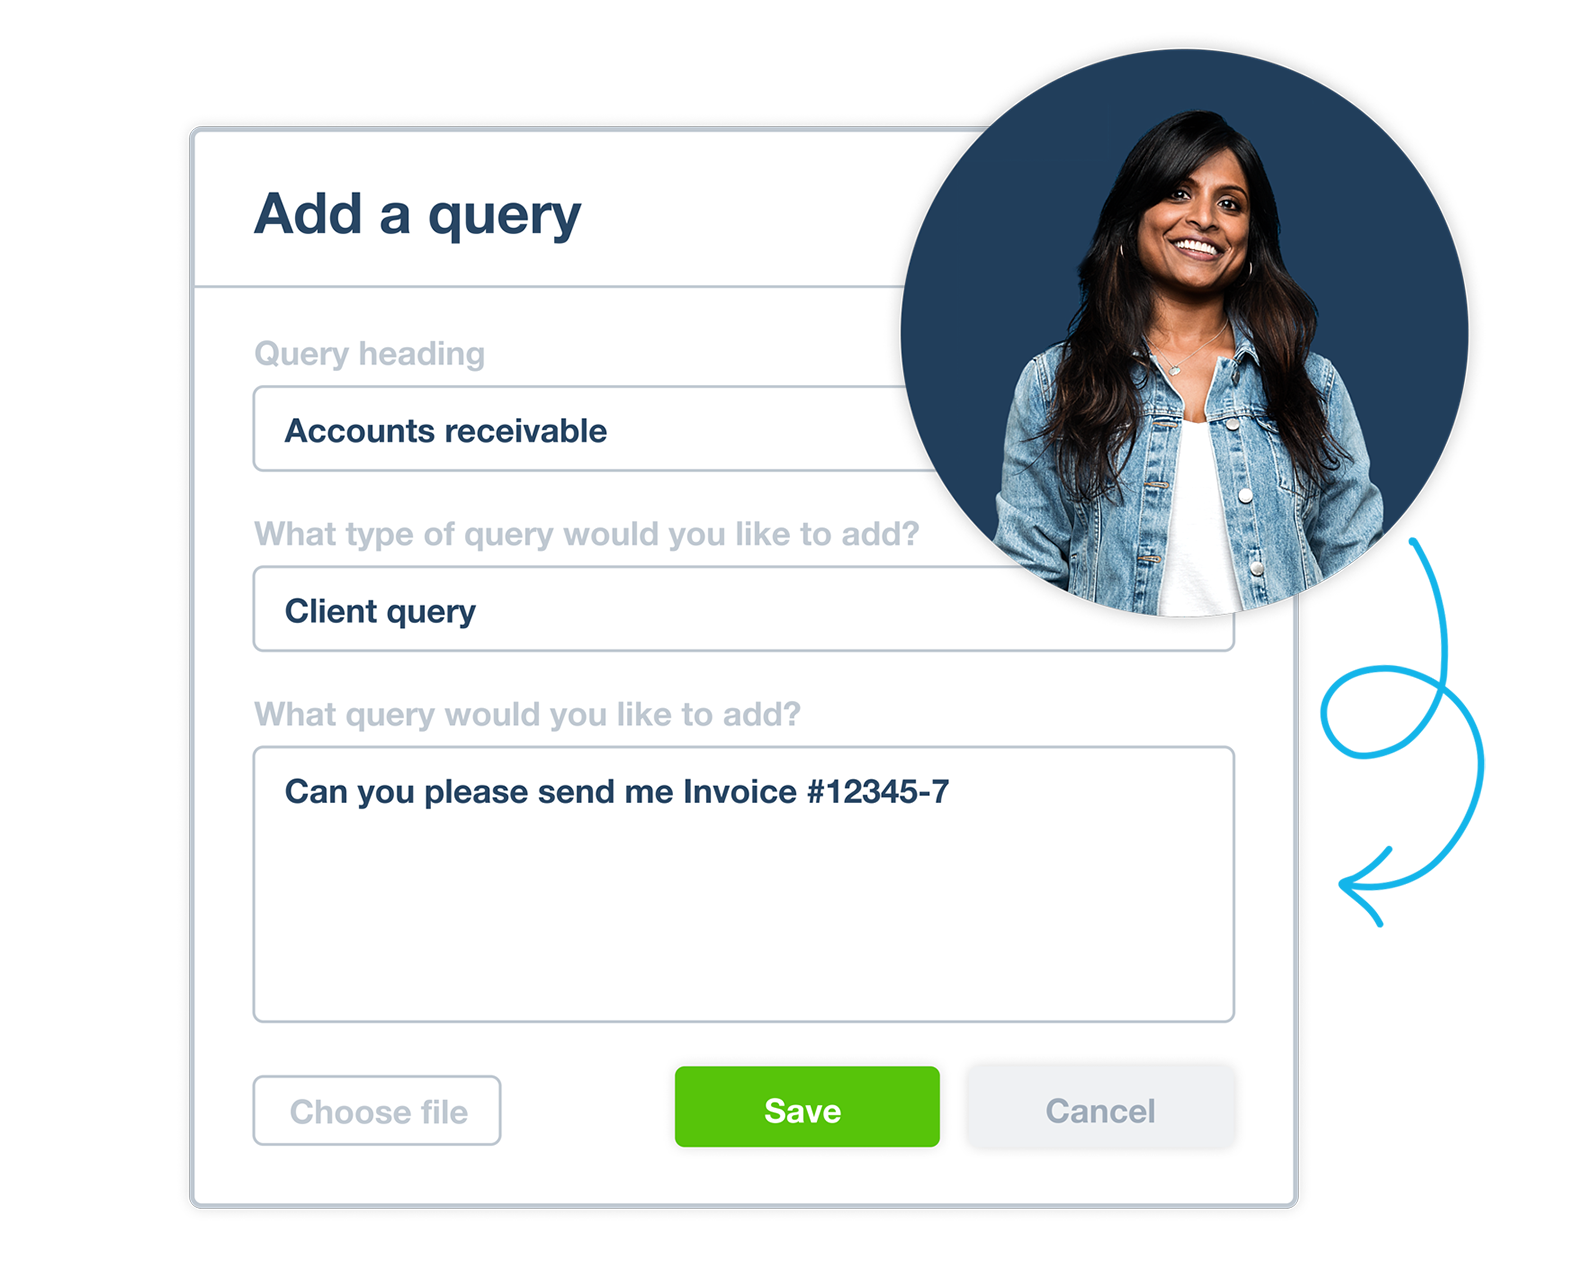 The client query interface in Xero, with a query stating "Can you please send me Invoice #12345-7?"